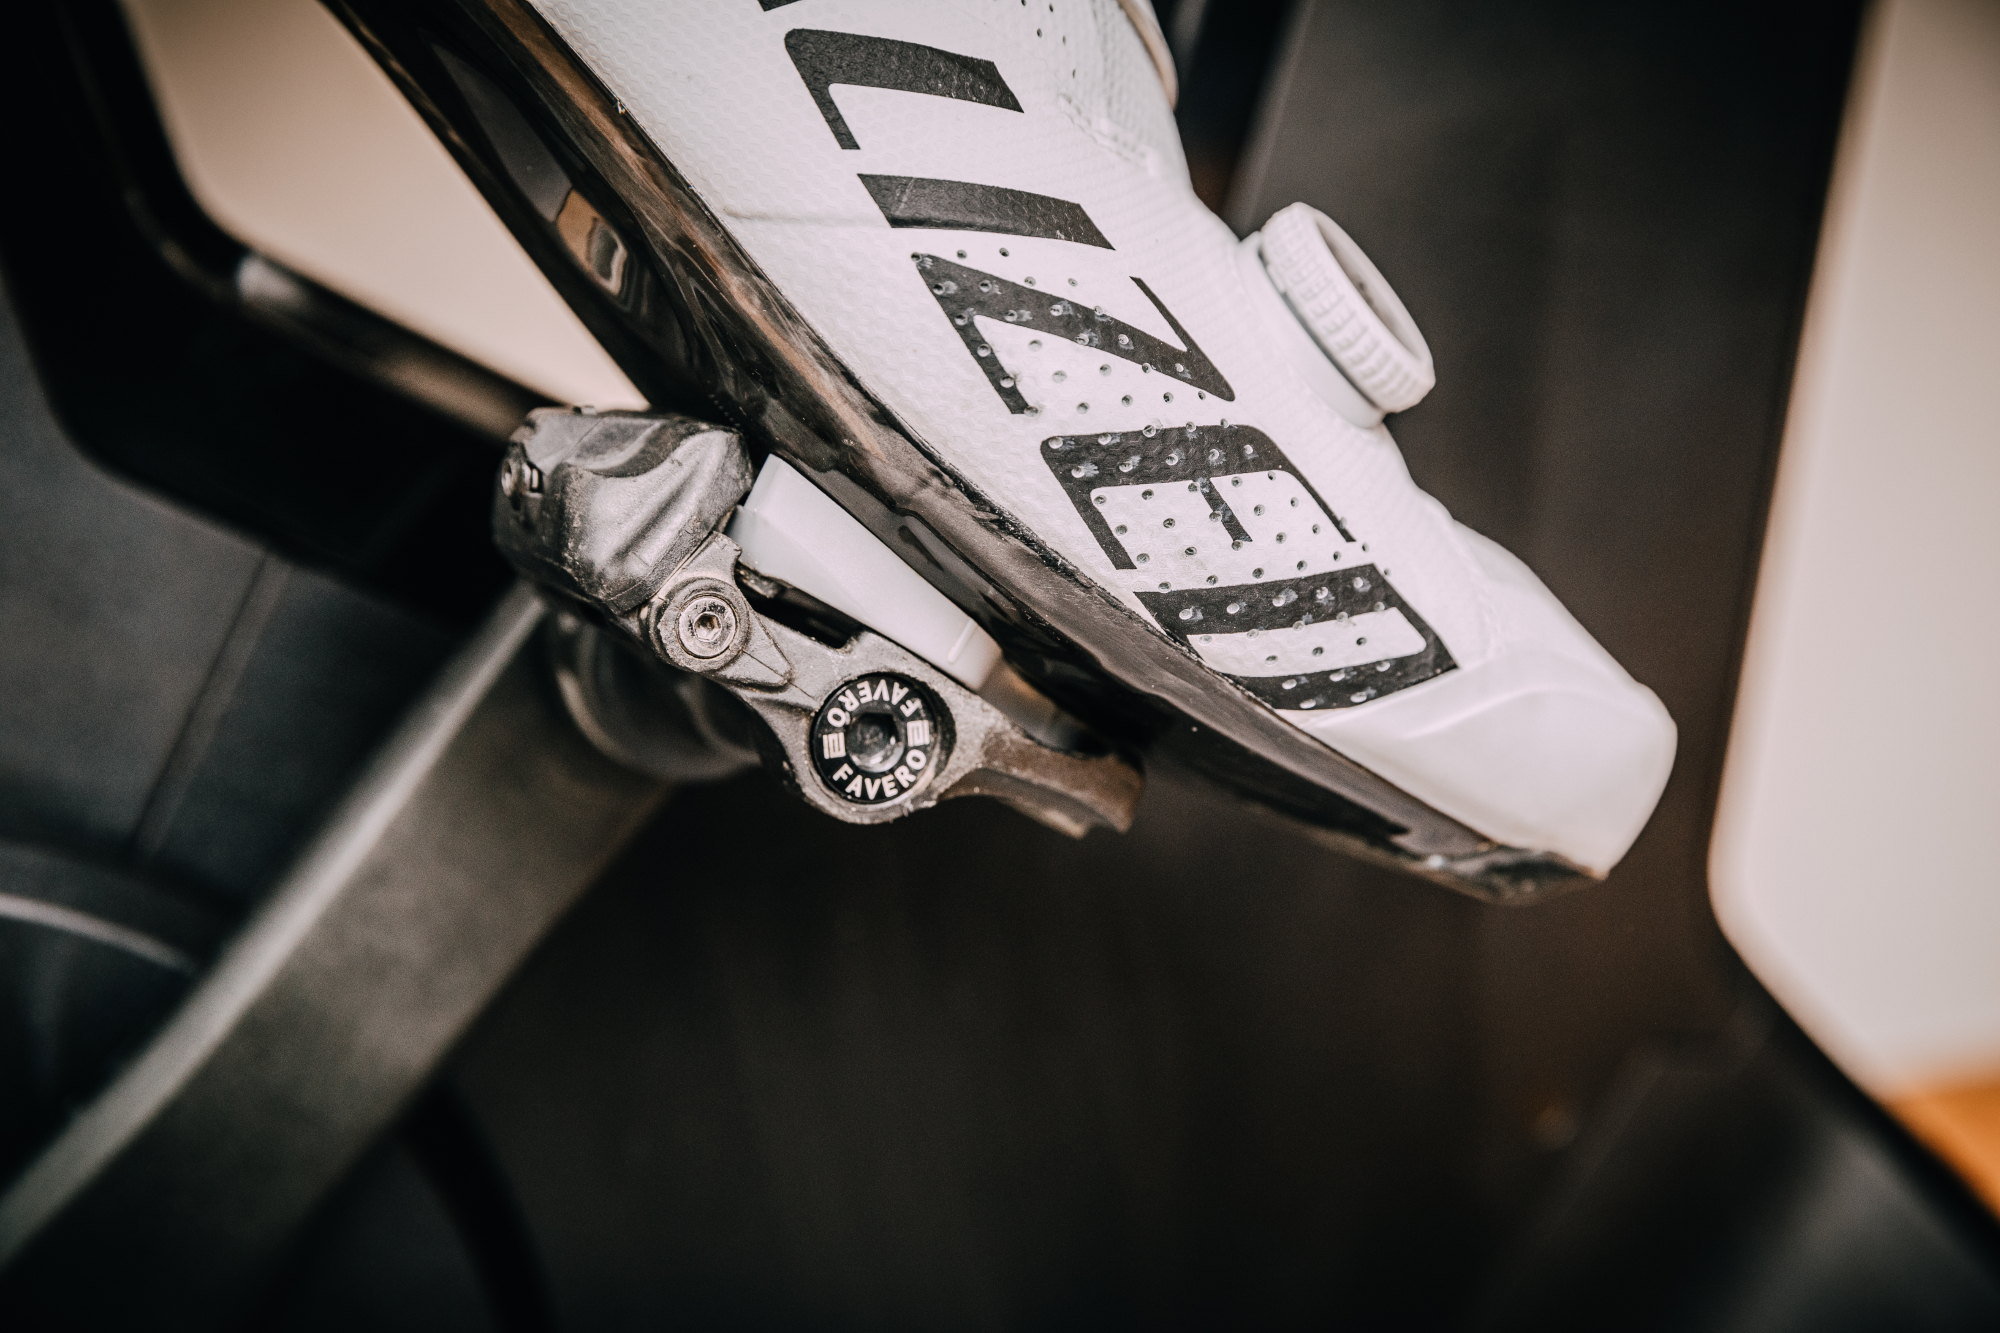 Image shows a rider clipped into power meter pedals.